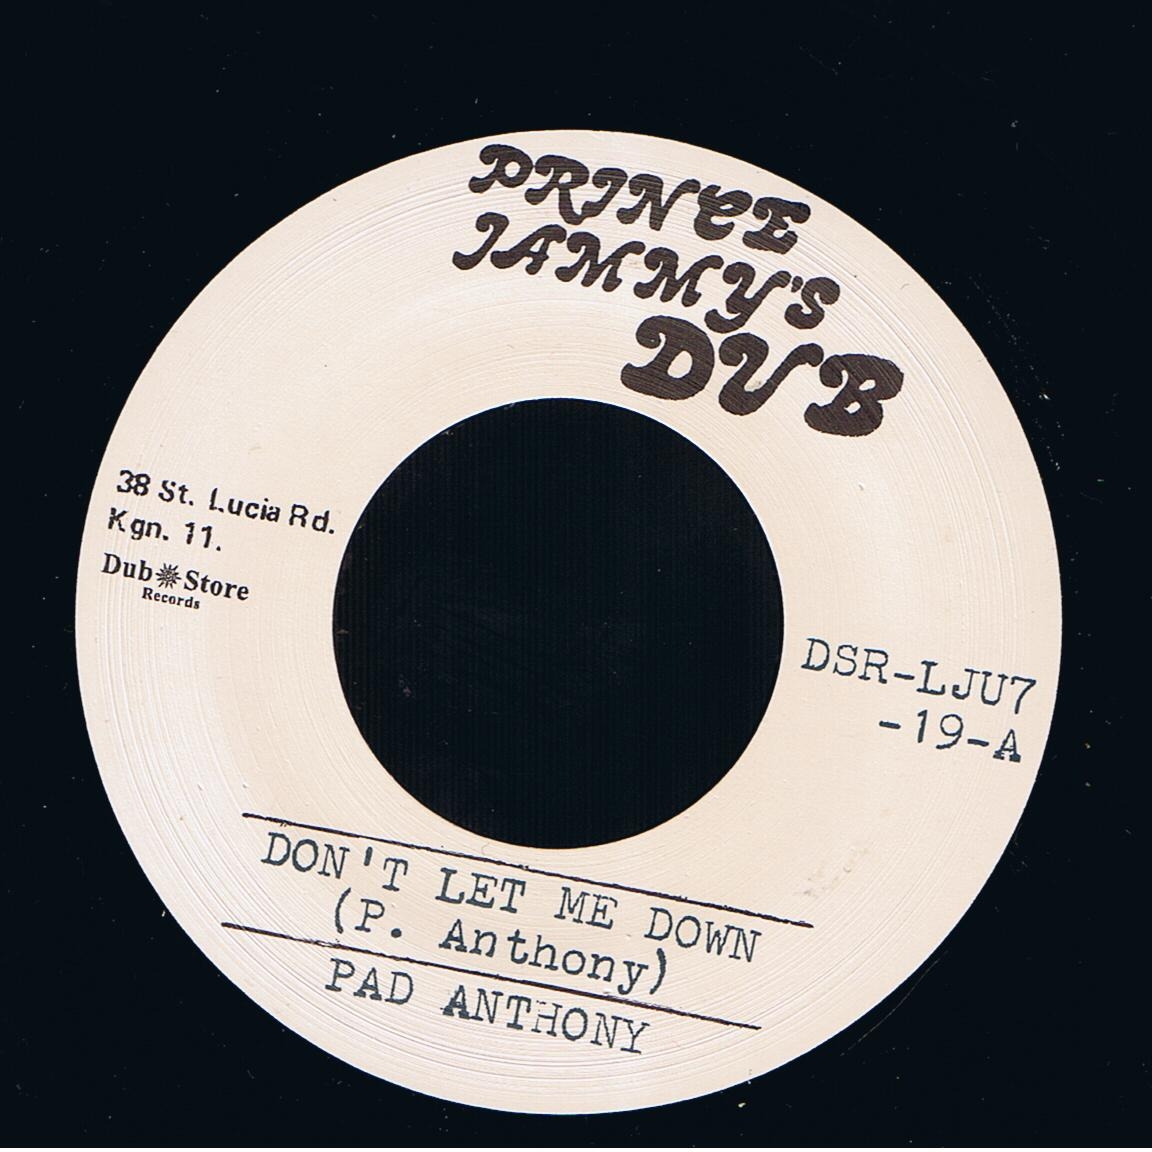 Pad Anthony - Don't Let Me Down / Version (7")